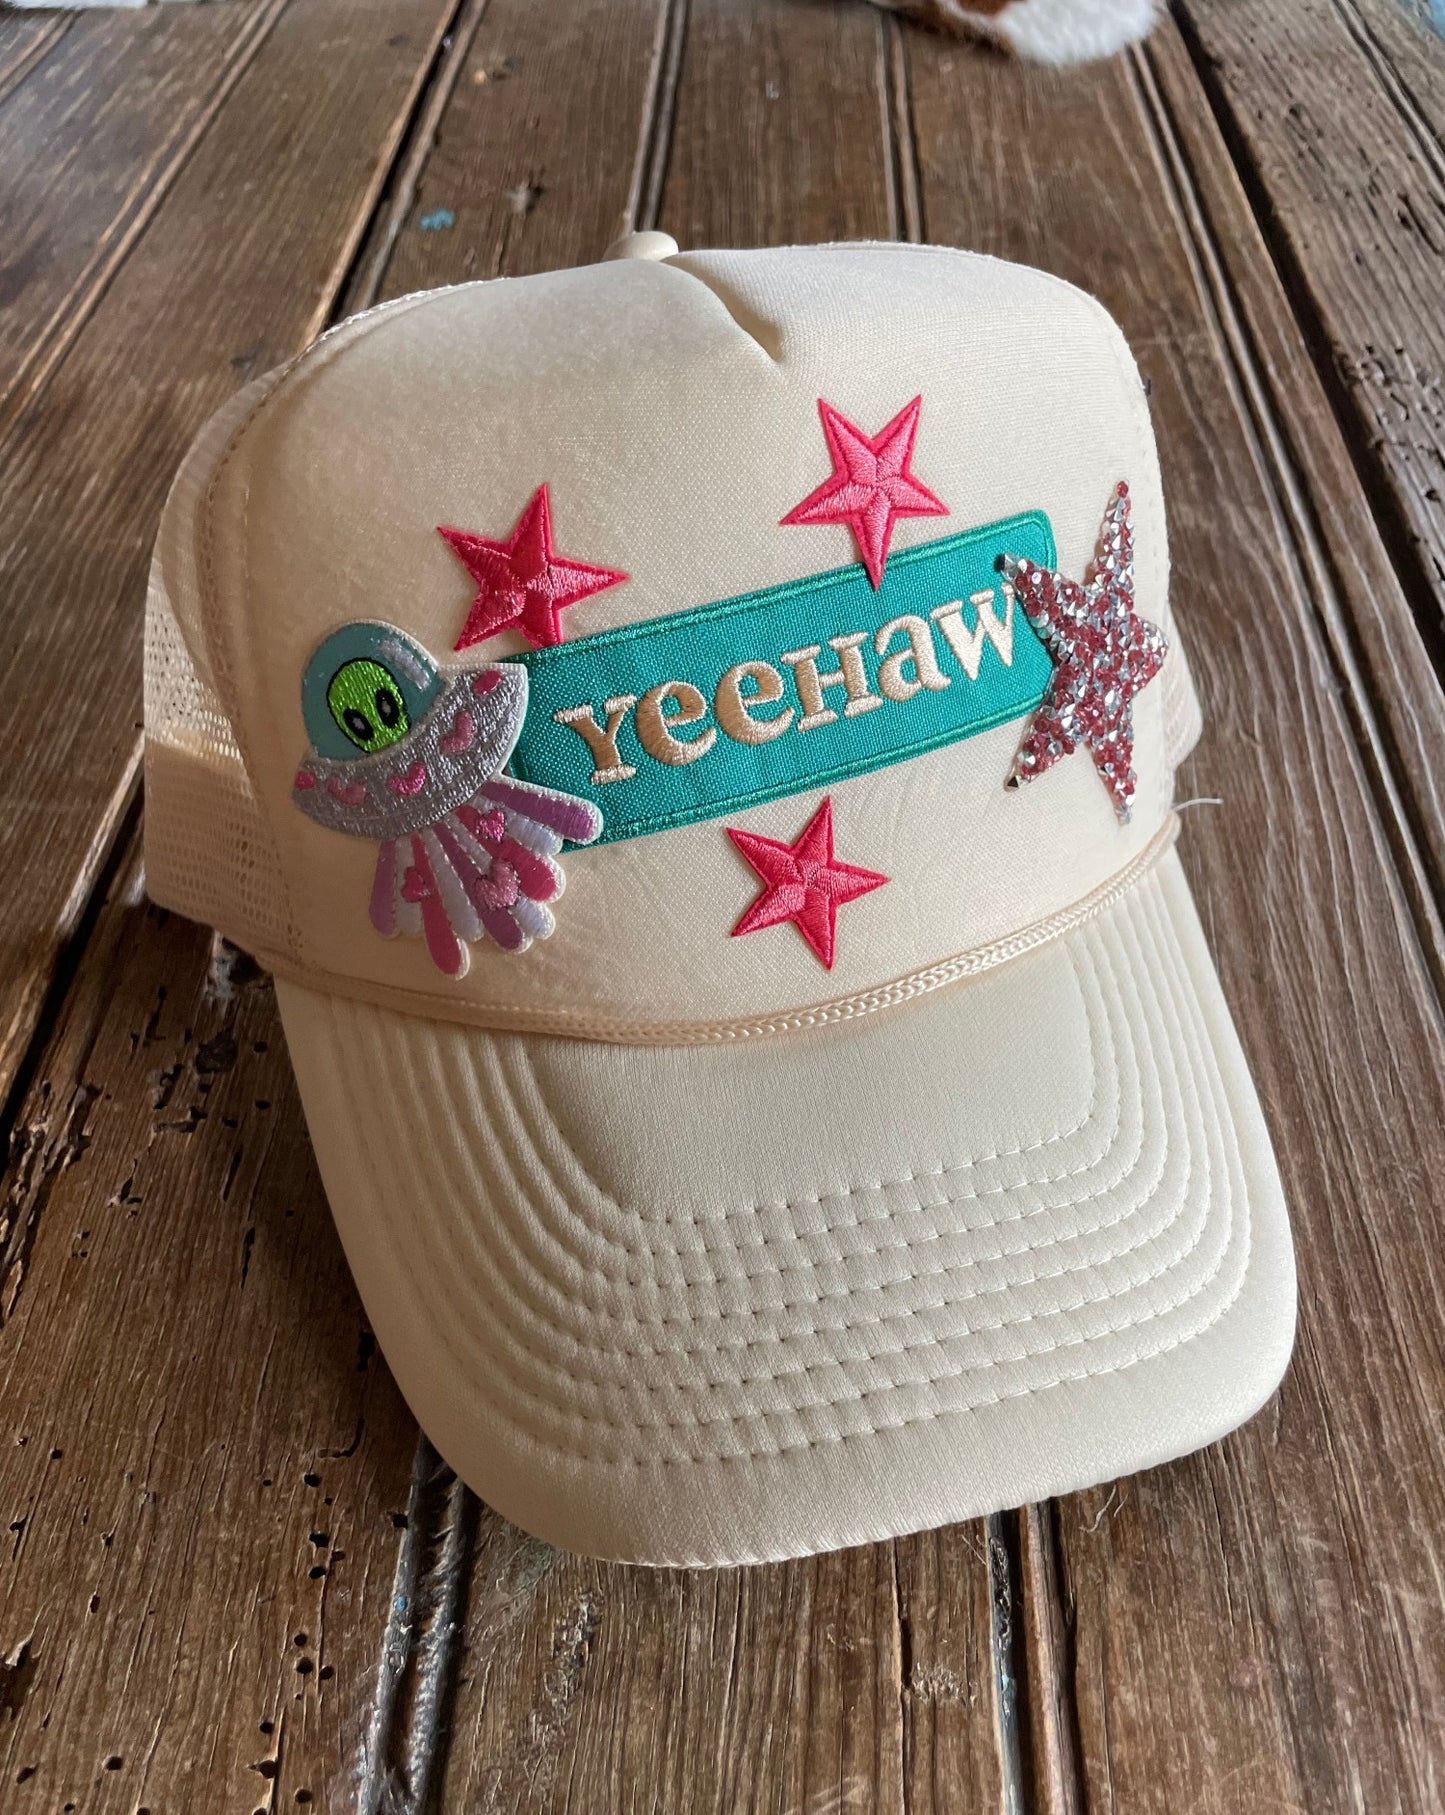 An Alien Yeehaw Trucker hat with custom patches